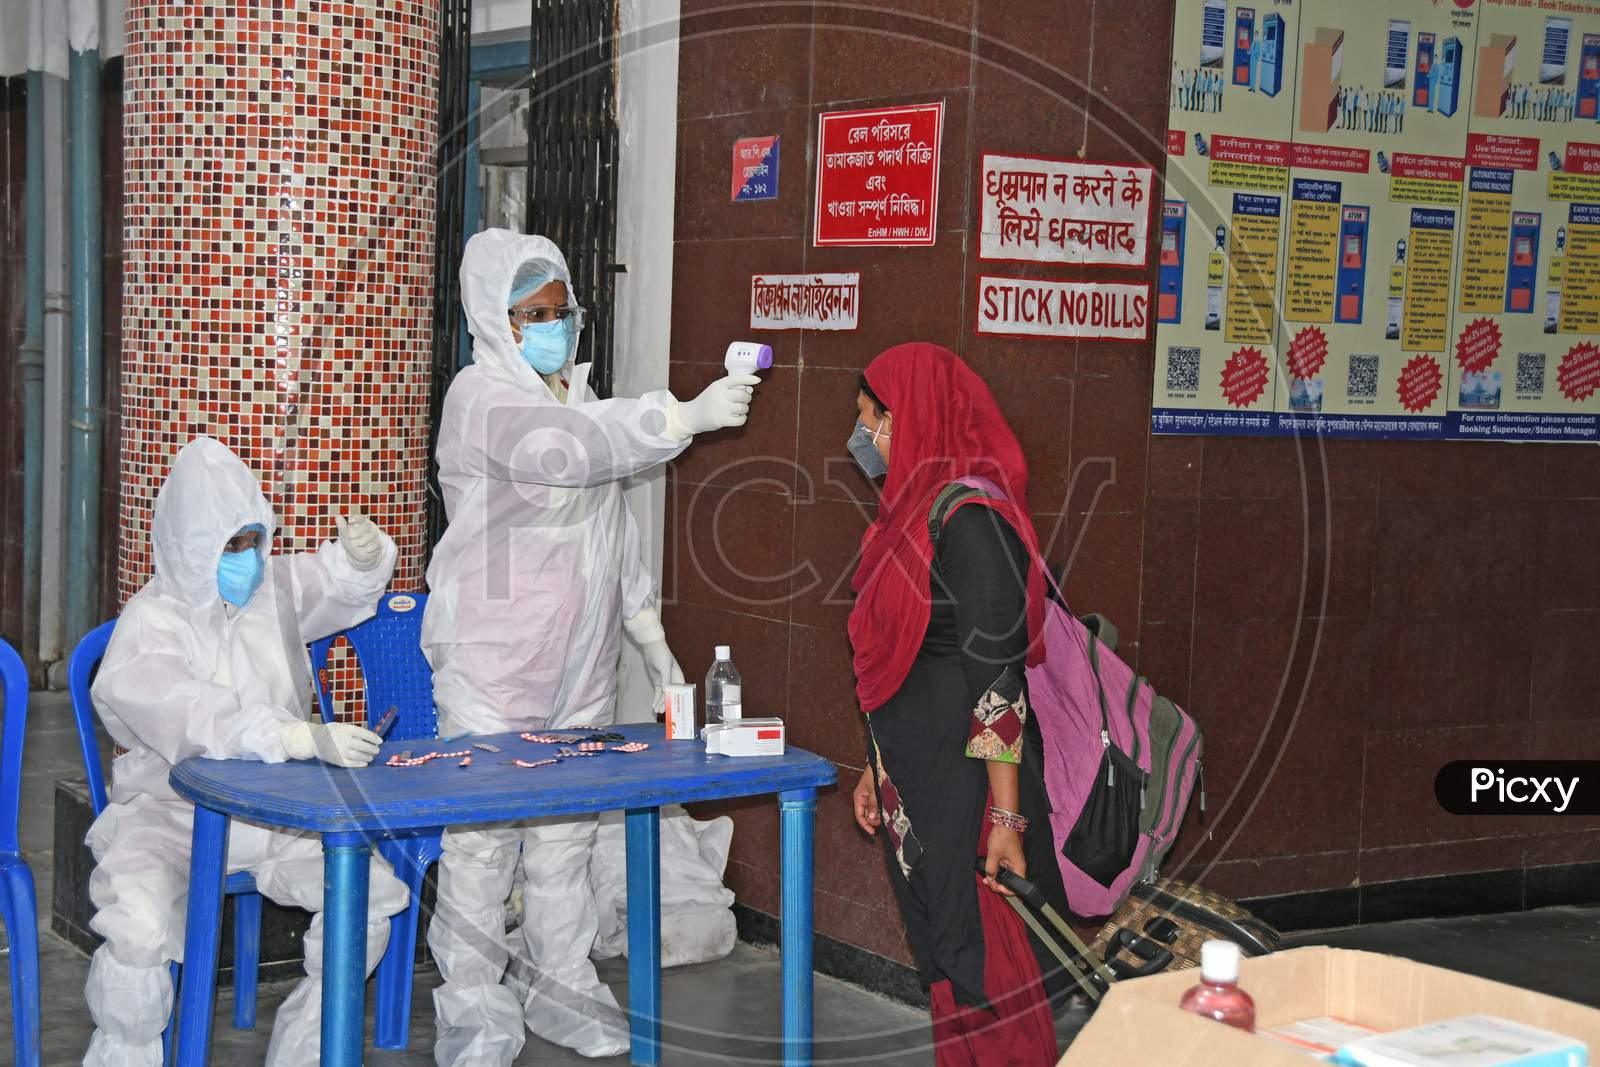 The migrant workers returning to Burdwan (Home Town) on the 'Shramik Special' Train from Chennai are undergoing health screening for Novel Coronavirus (COVID-19) testing.